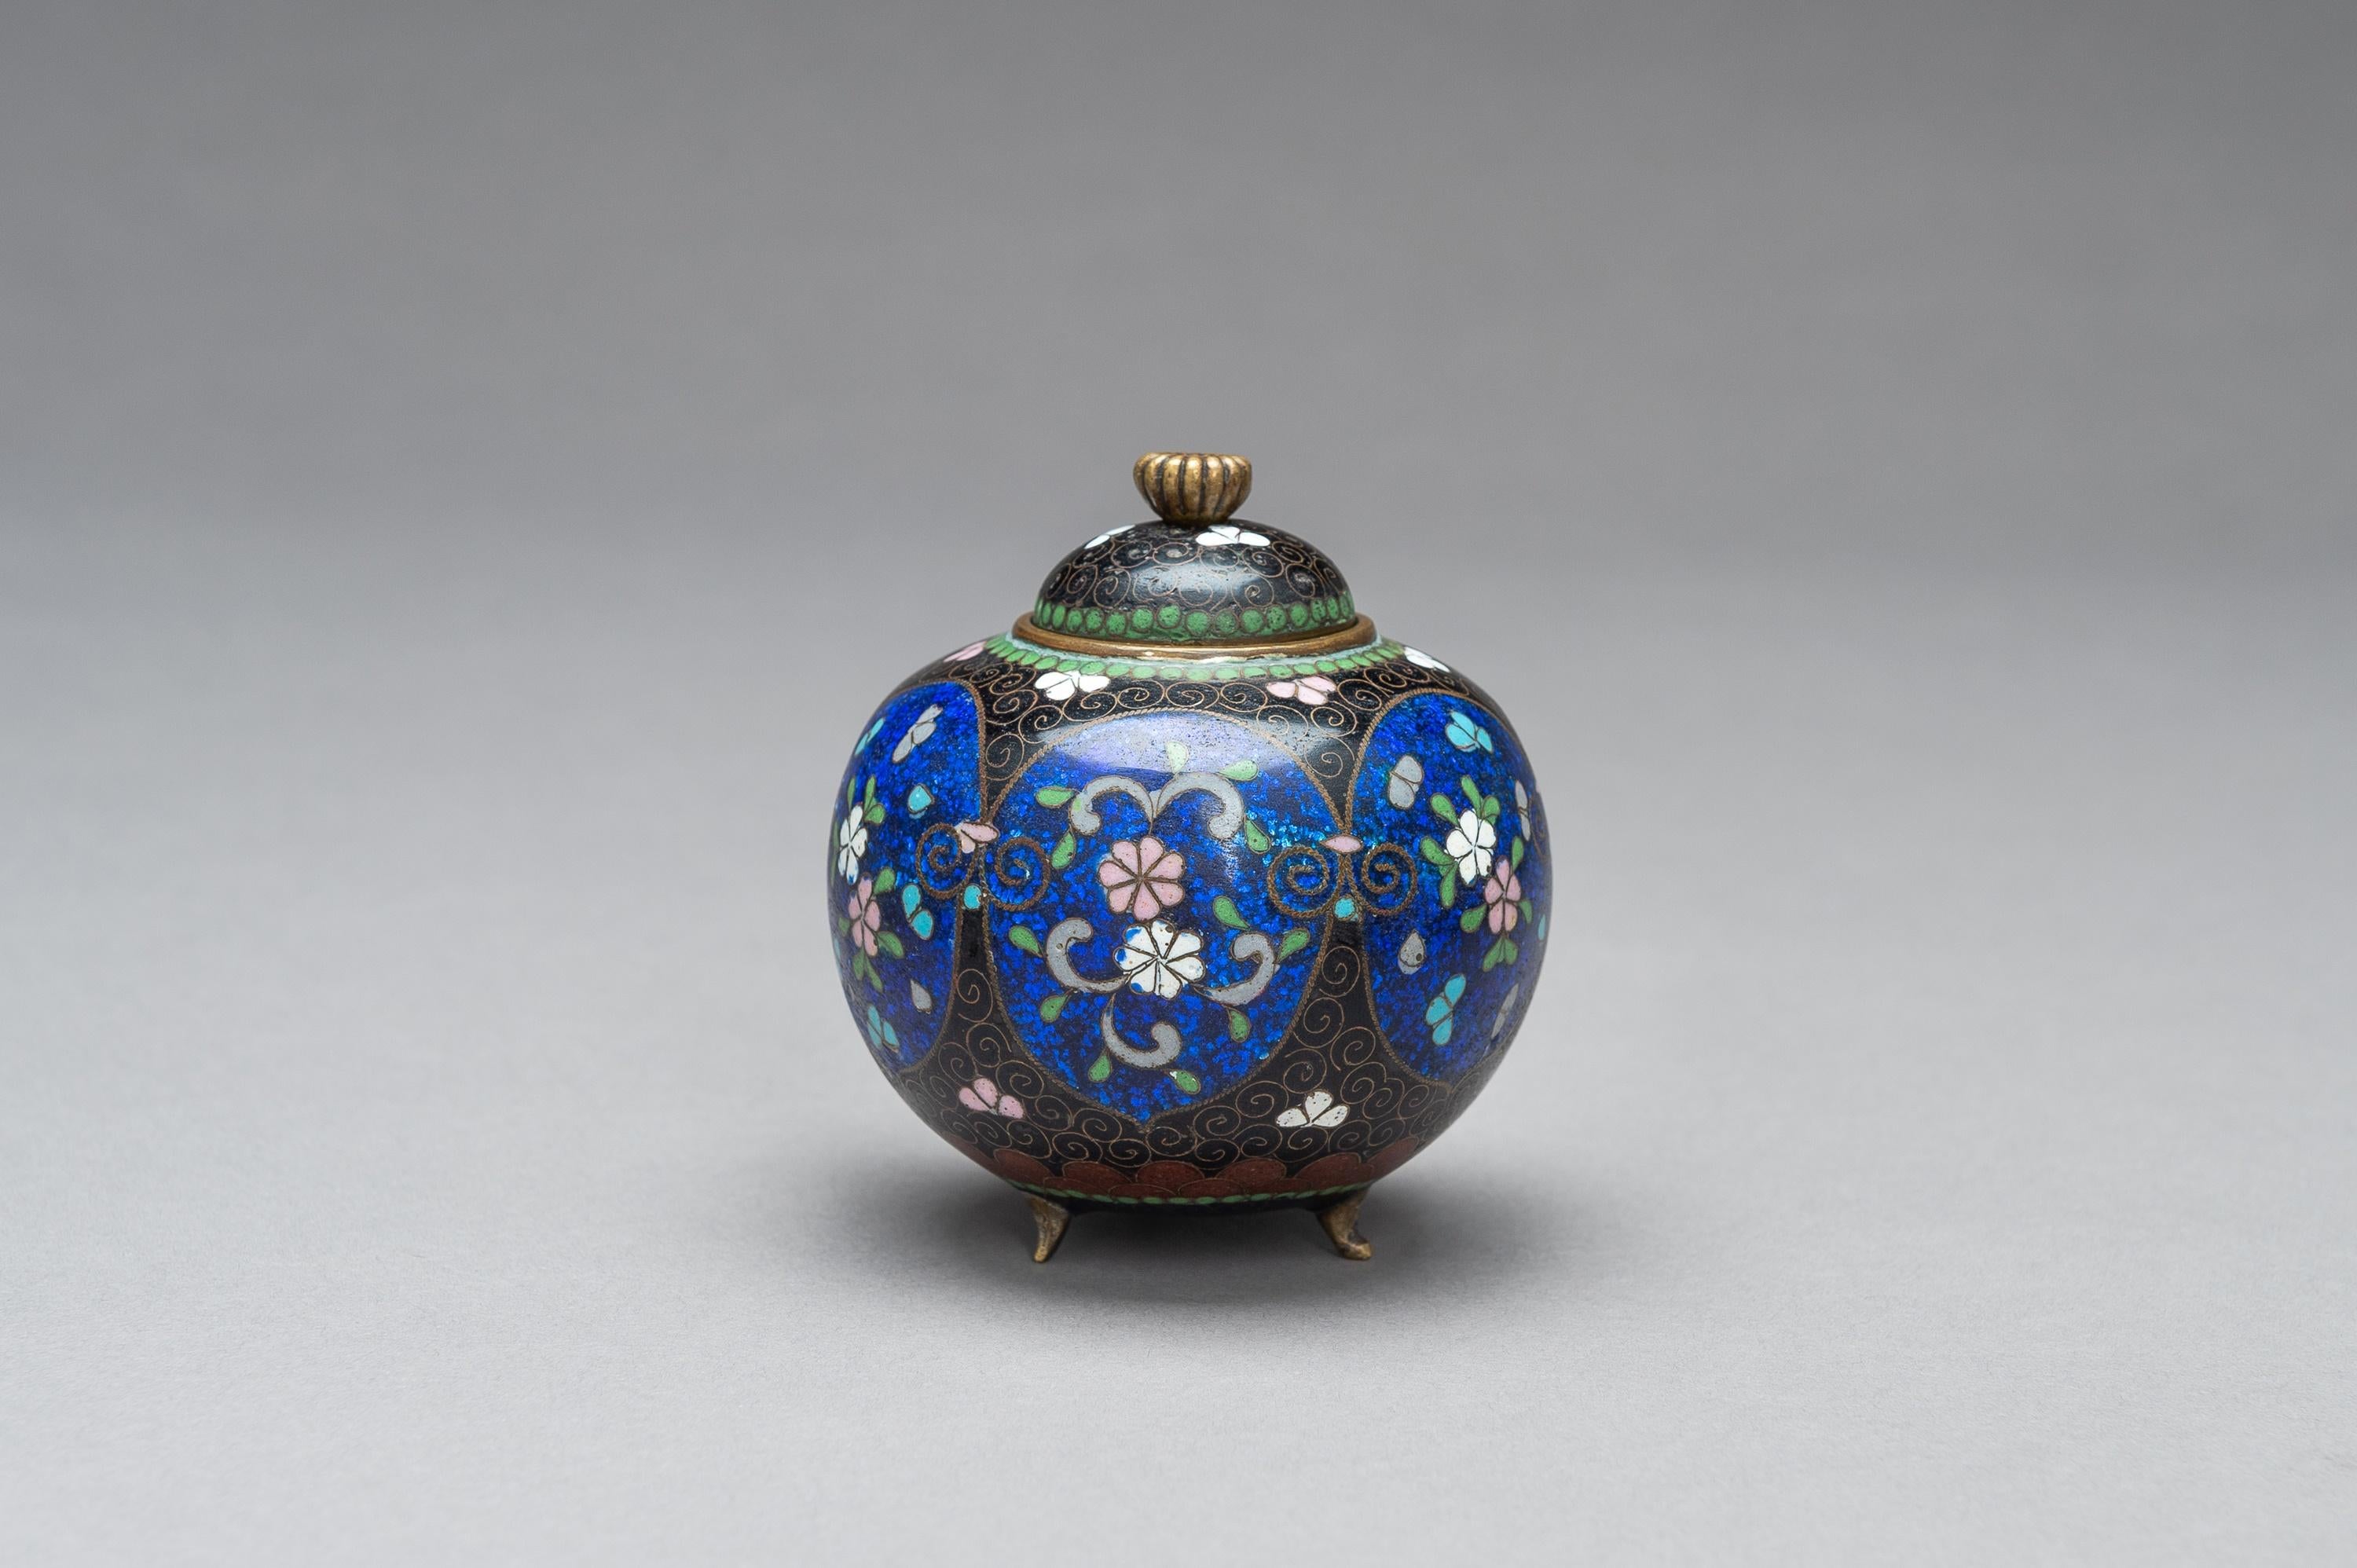 Japanese Cloisonné Koro with cover, Meiji Period (1868-1912)

Of slightly compressed globular form standing on three short curved feet, with domed cover set with a kiku blossom knob, worked in copper wire and colored enamels with floral motifs on